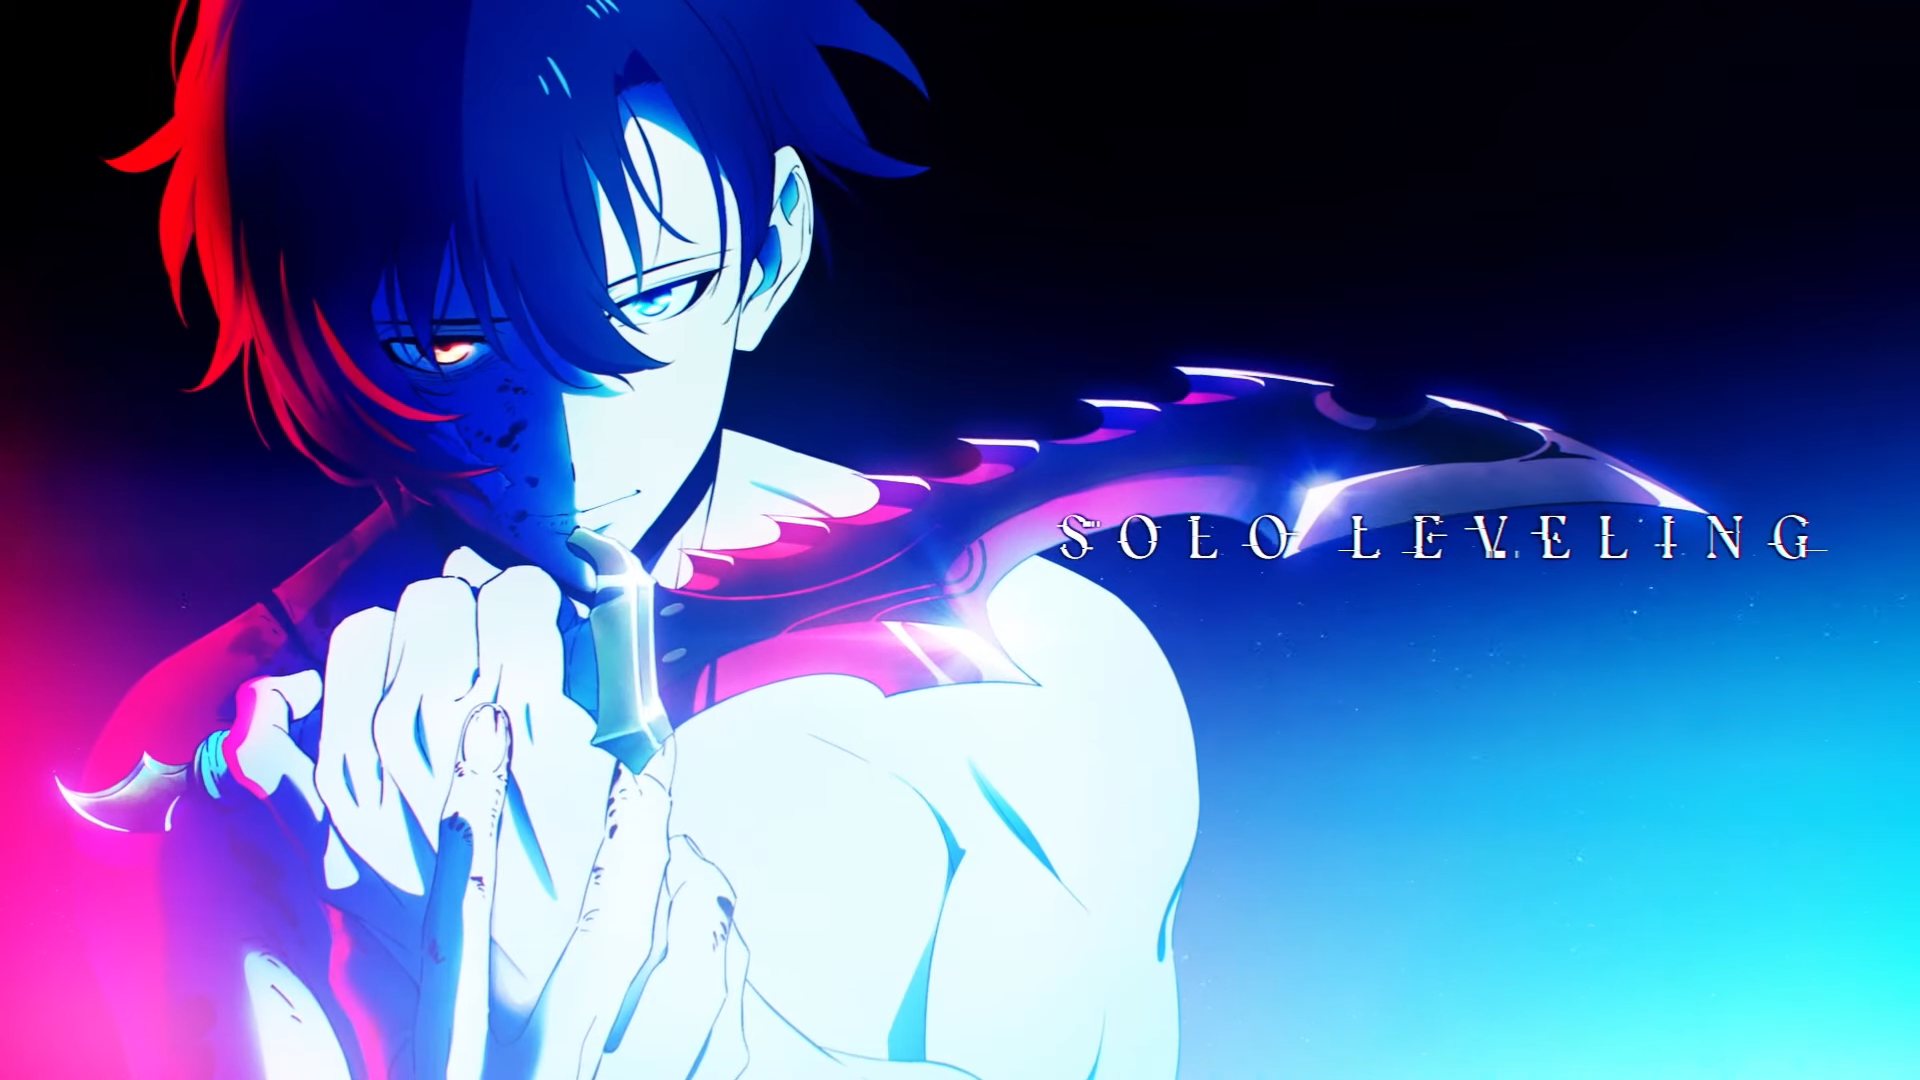 Solo Leveling Anime by A-1 Pictures Officially Announced, Teaser